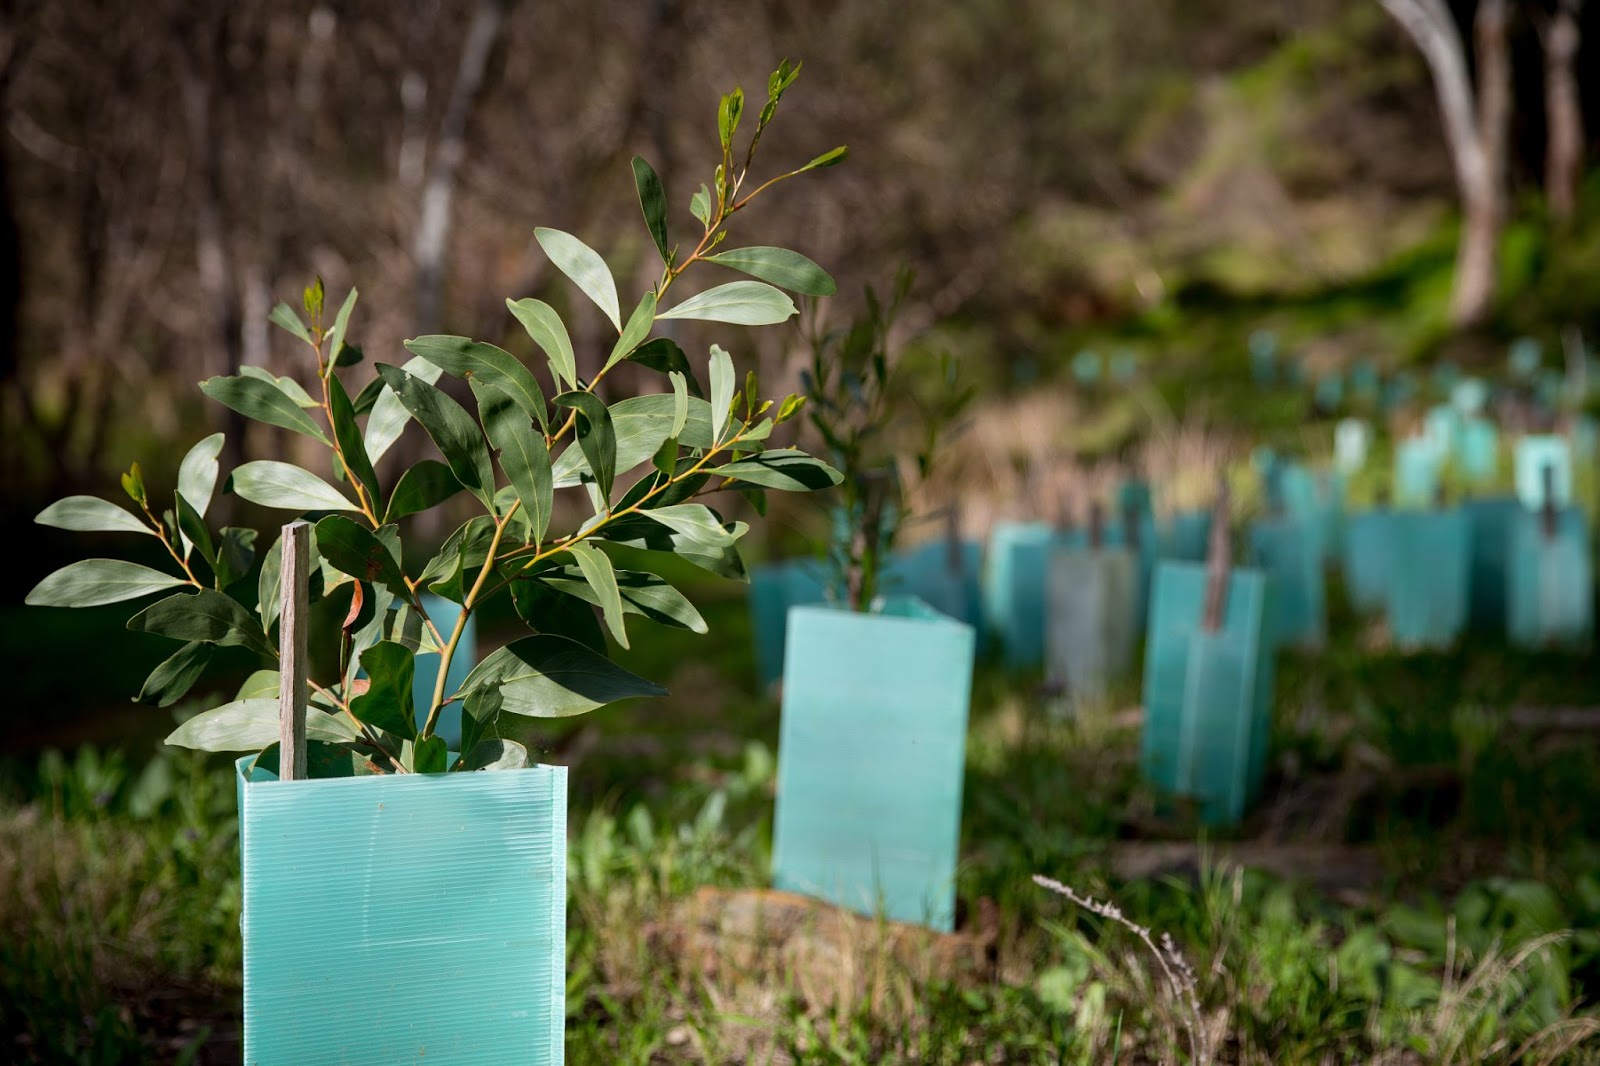 Young native trees planted together